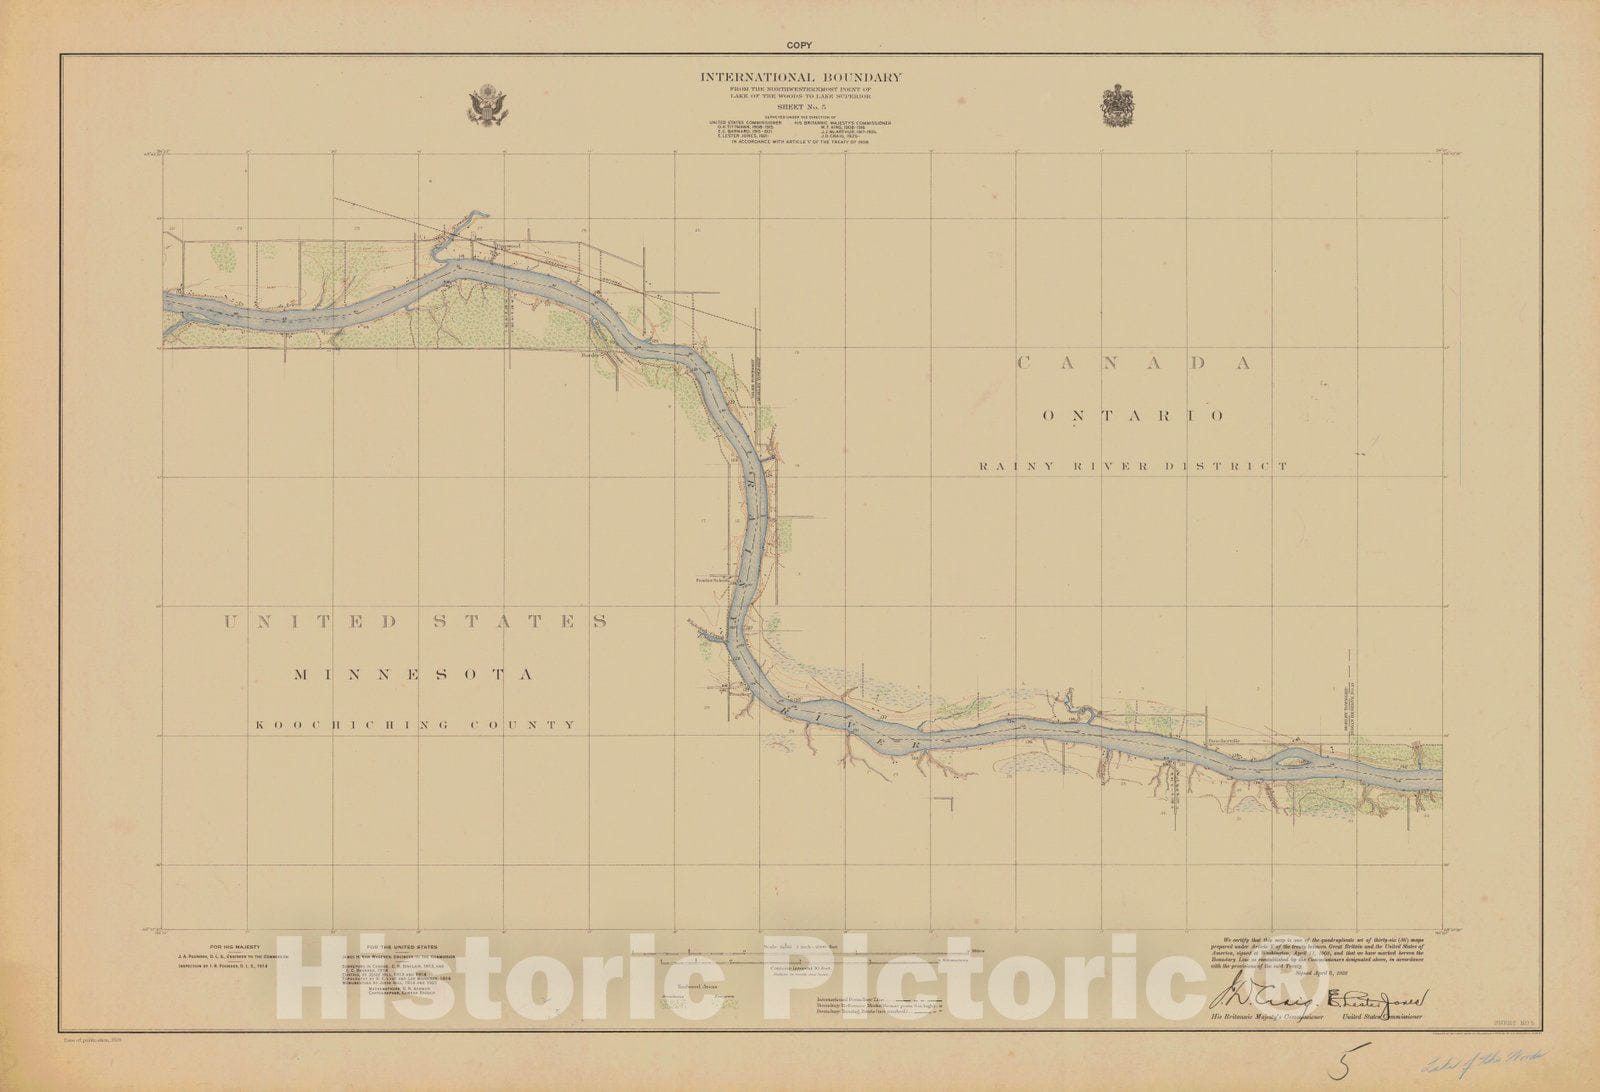 Historic Nautical Map - International Boundary, From The Northwestern Point Of Lake Of The Woods To Lake Superior, Sheet No. 5, MN, 1928 NOAA Topographic - Vintage Decor Poster Wall Art Reproduction - 0